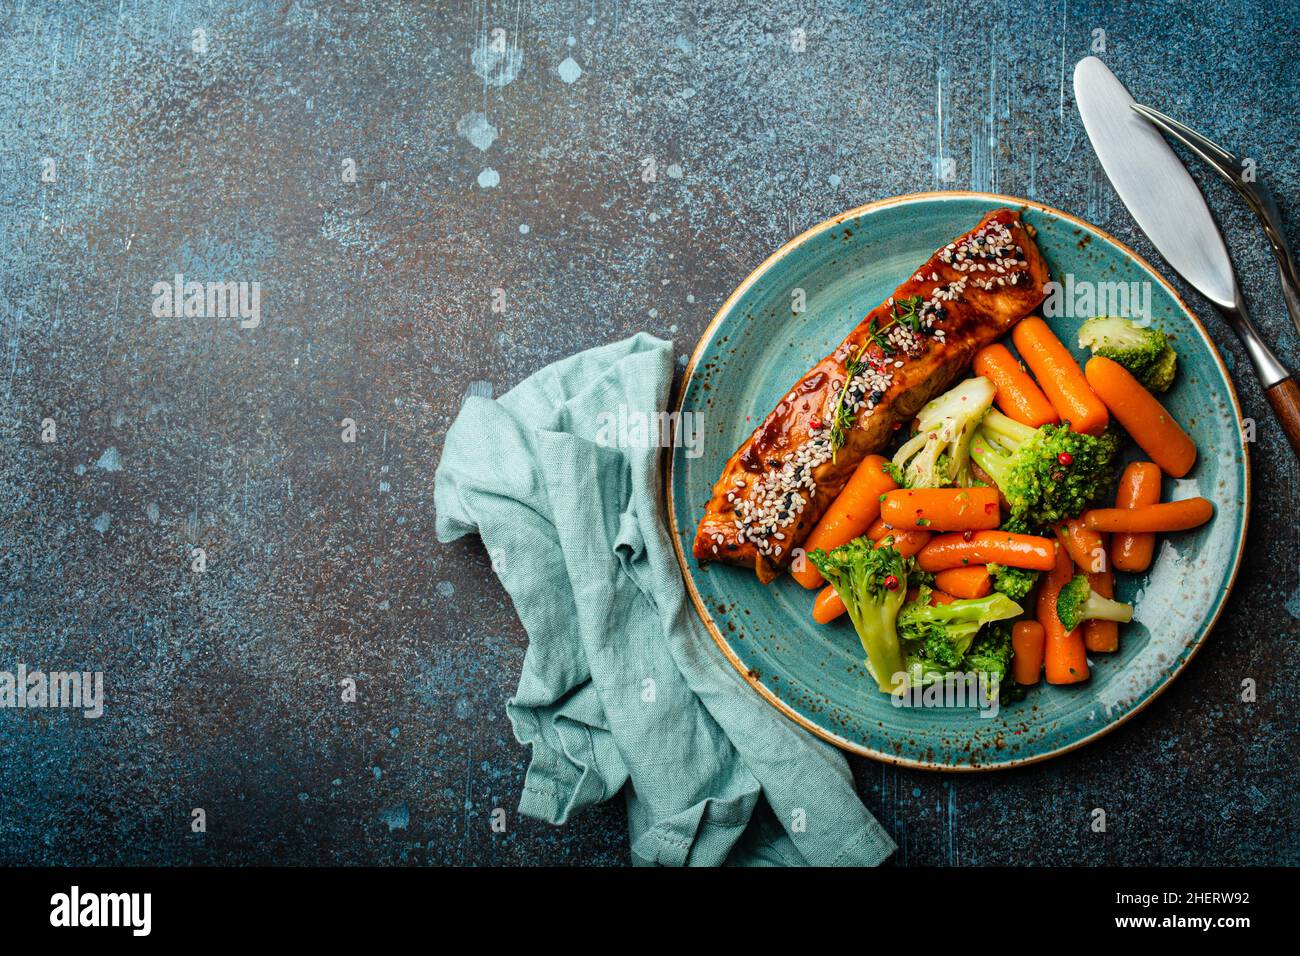 Grilled salmon fillet steak in teriyaki sauce with roasted vegetables carrot and broccoli Stock Photo